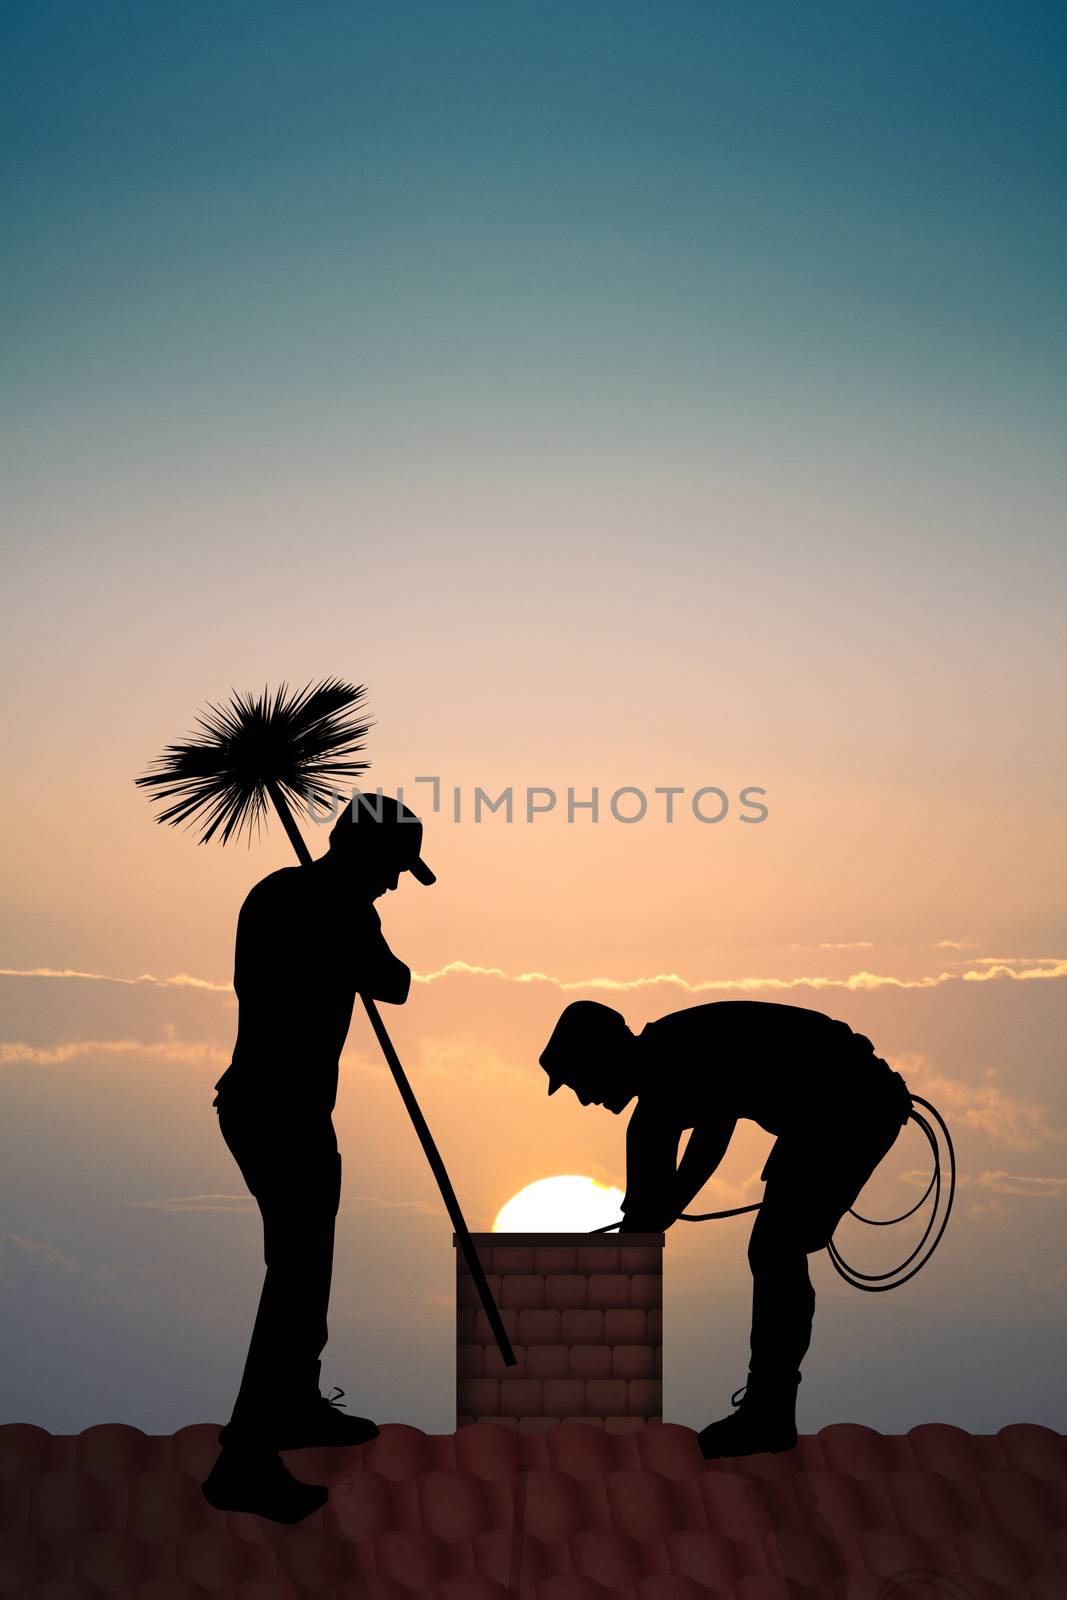 illustration of chimney sweep on the roof at sunset